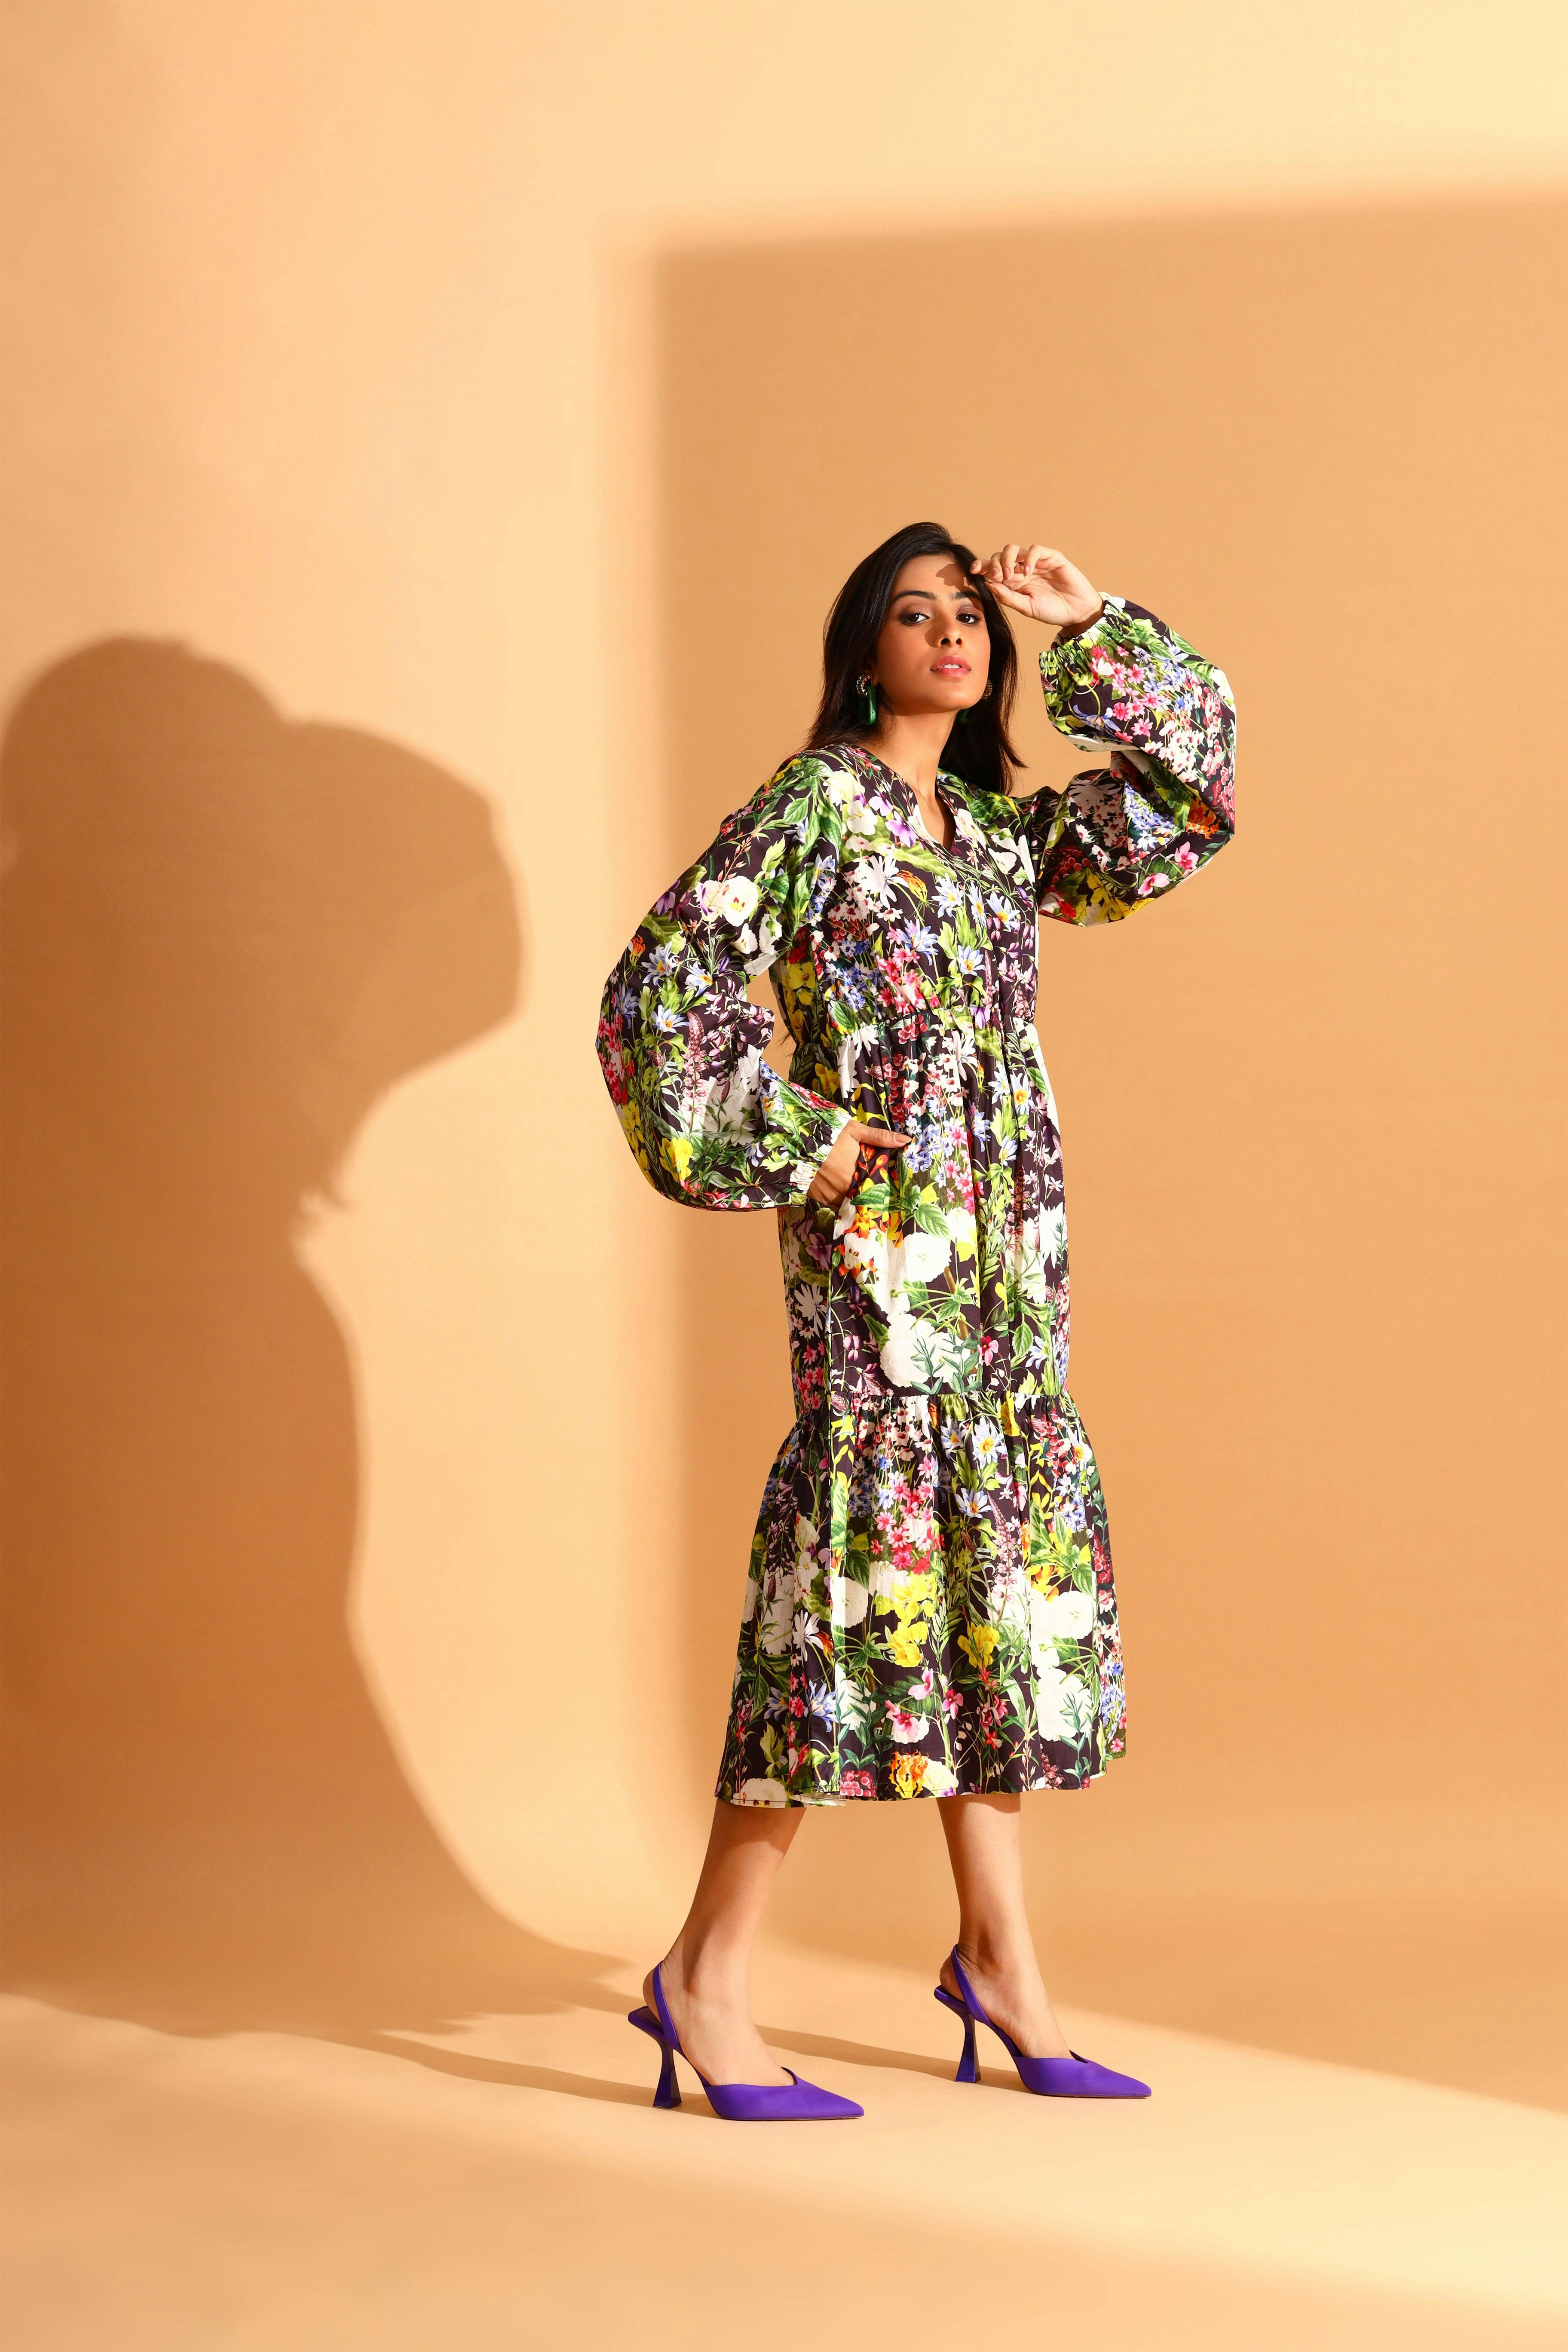 WILDFLOWER DRESS, a product by Moh India